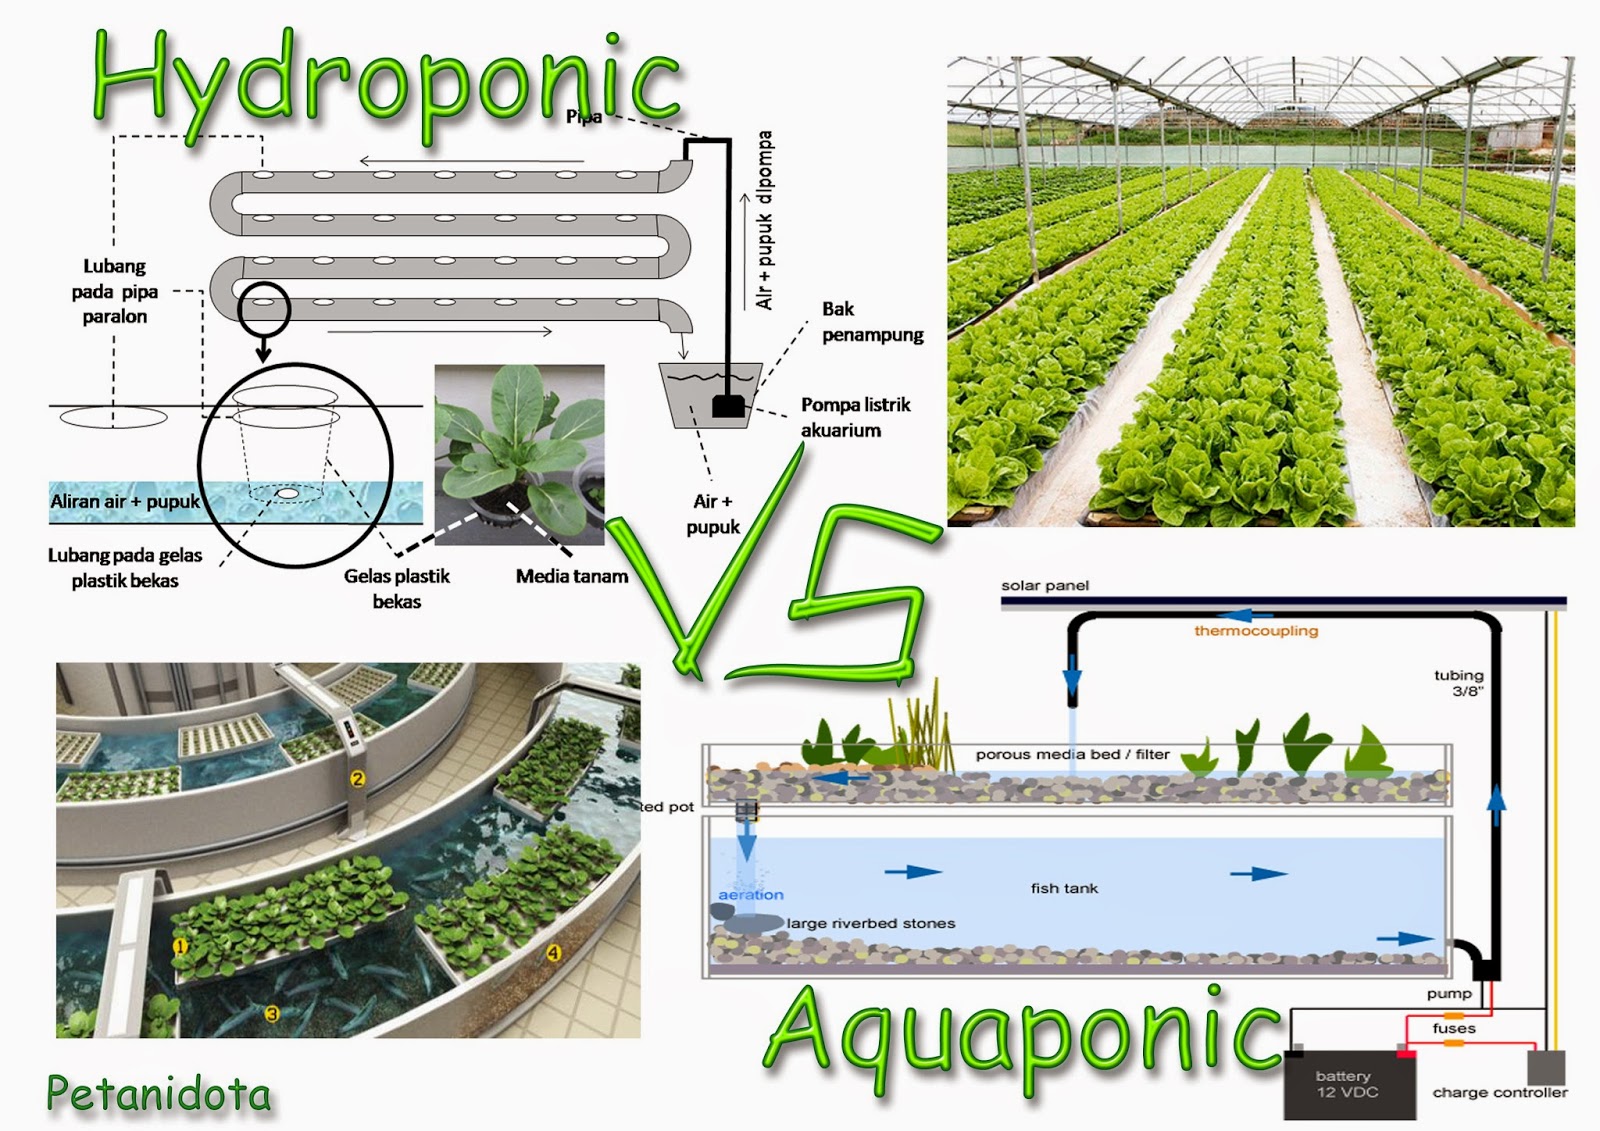 Hydroponic Vs Aquaponic Which is The Best one? | Petani TOP